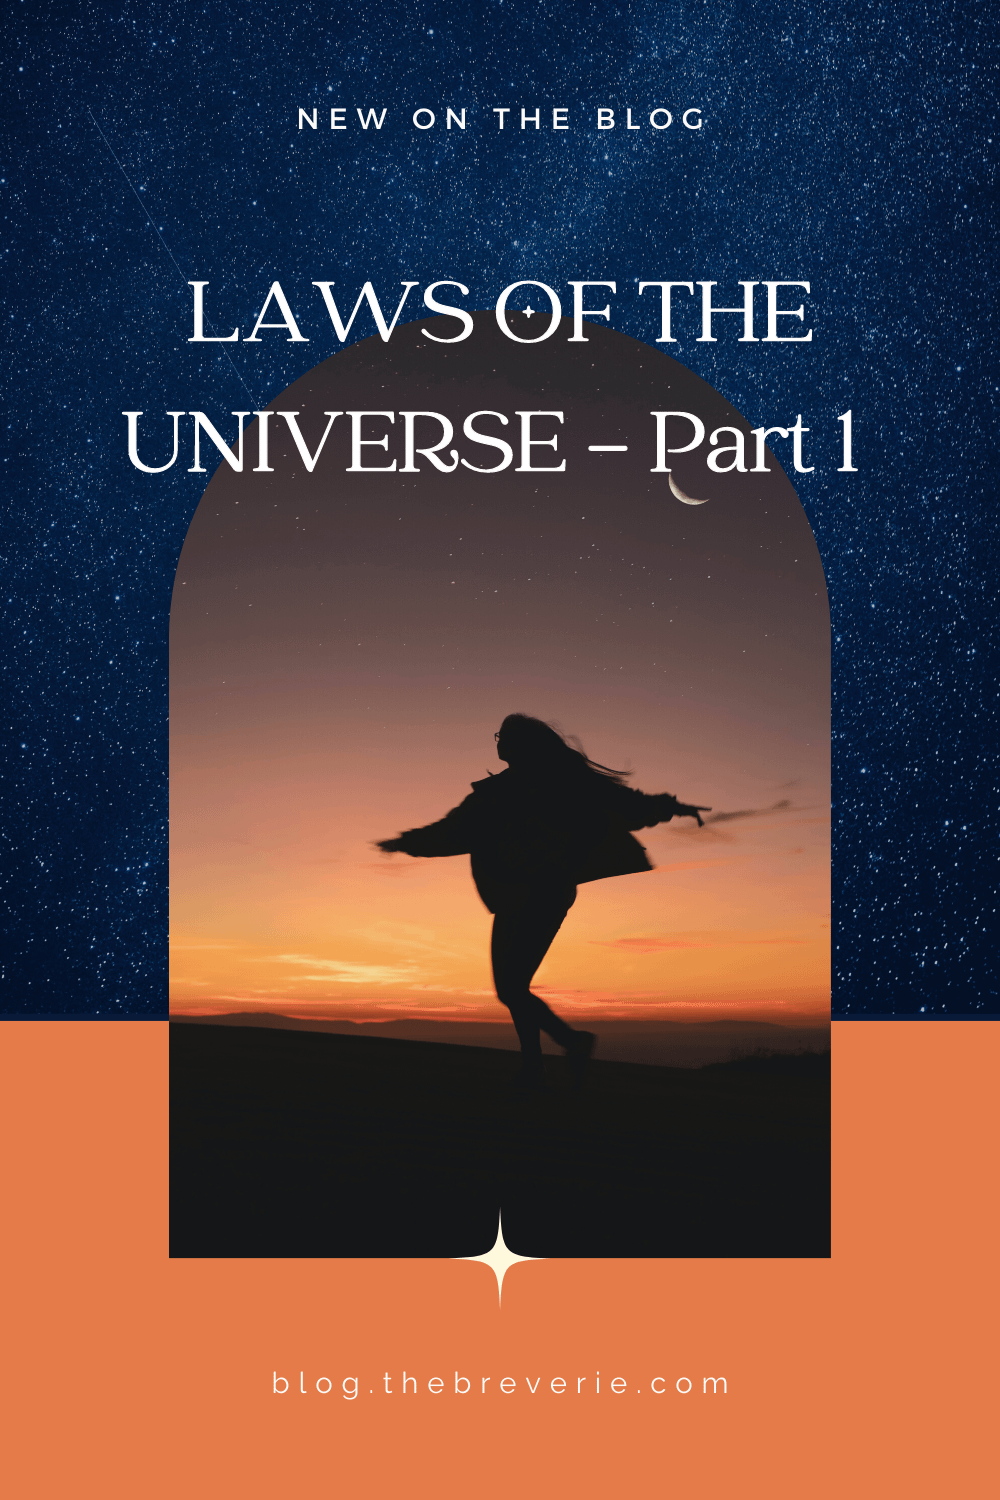 Laws of the Universe - Part 1 - Breverie Blog